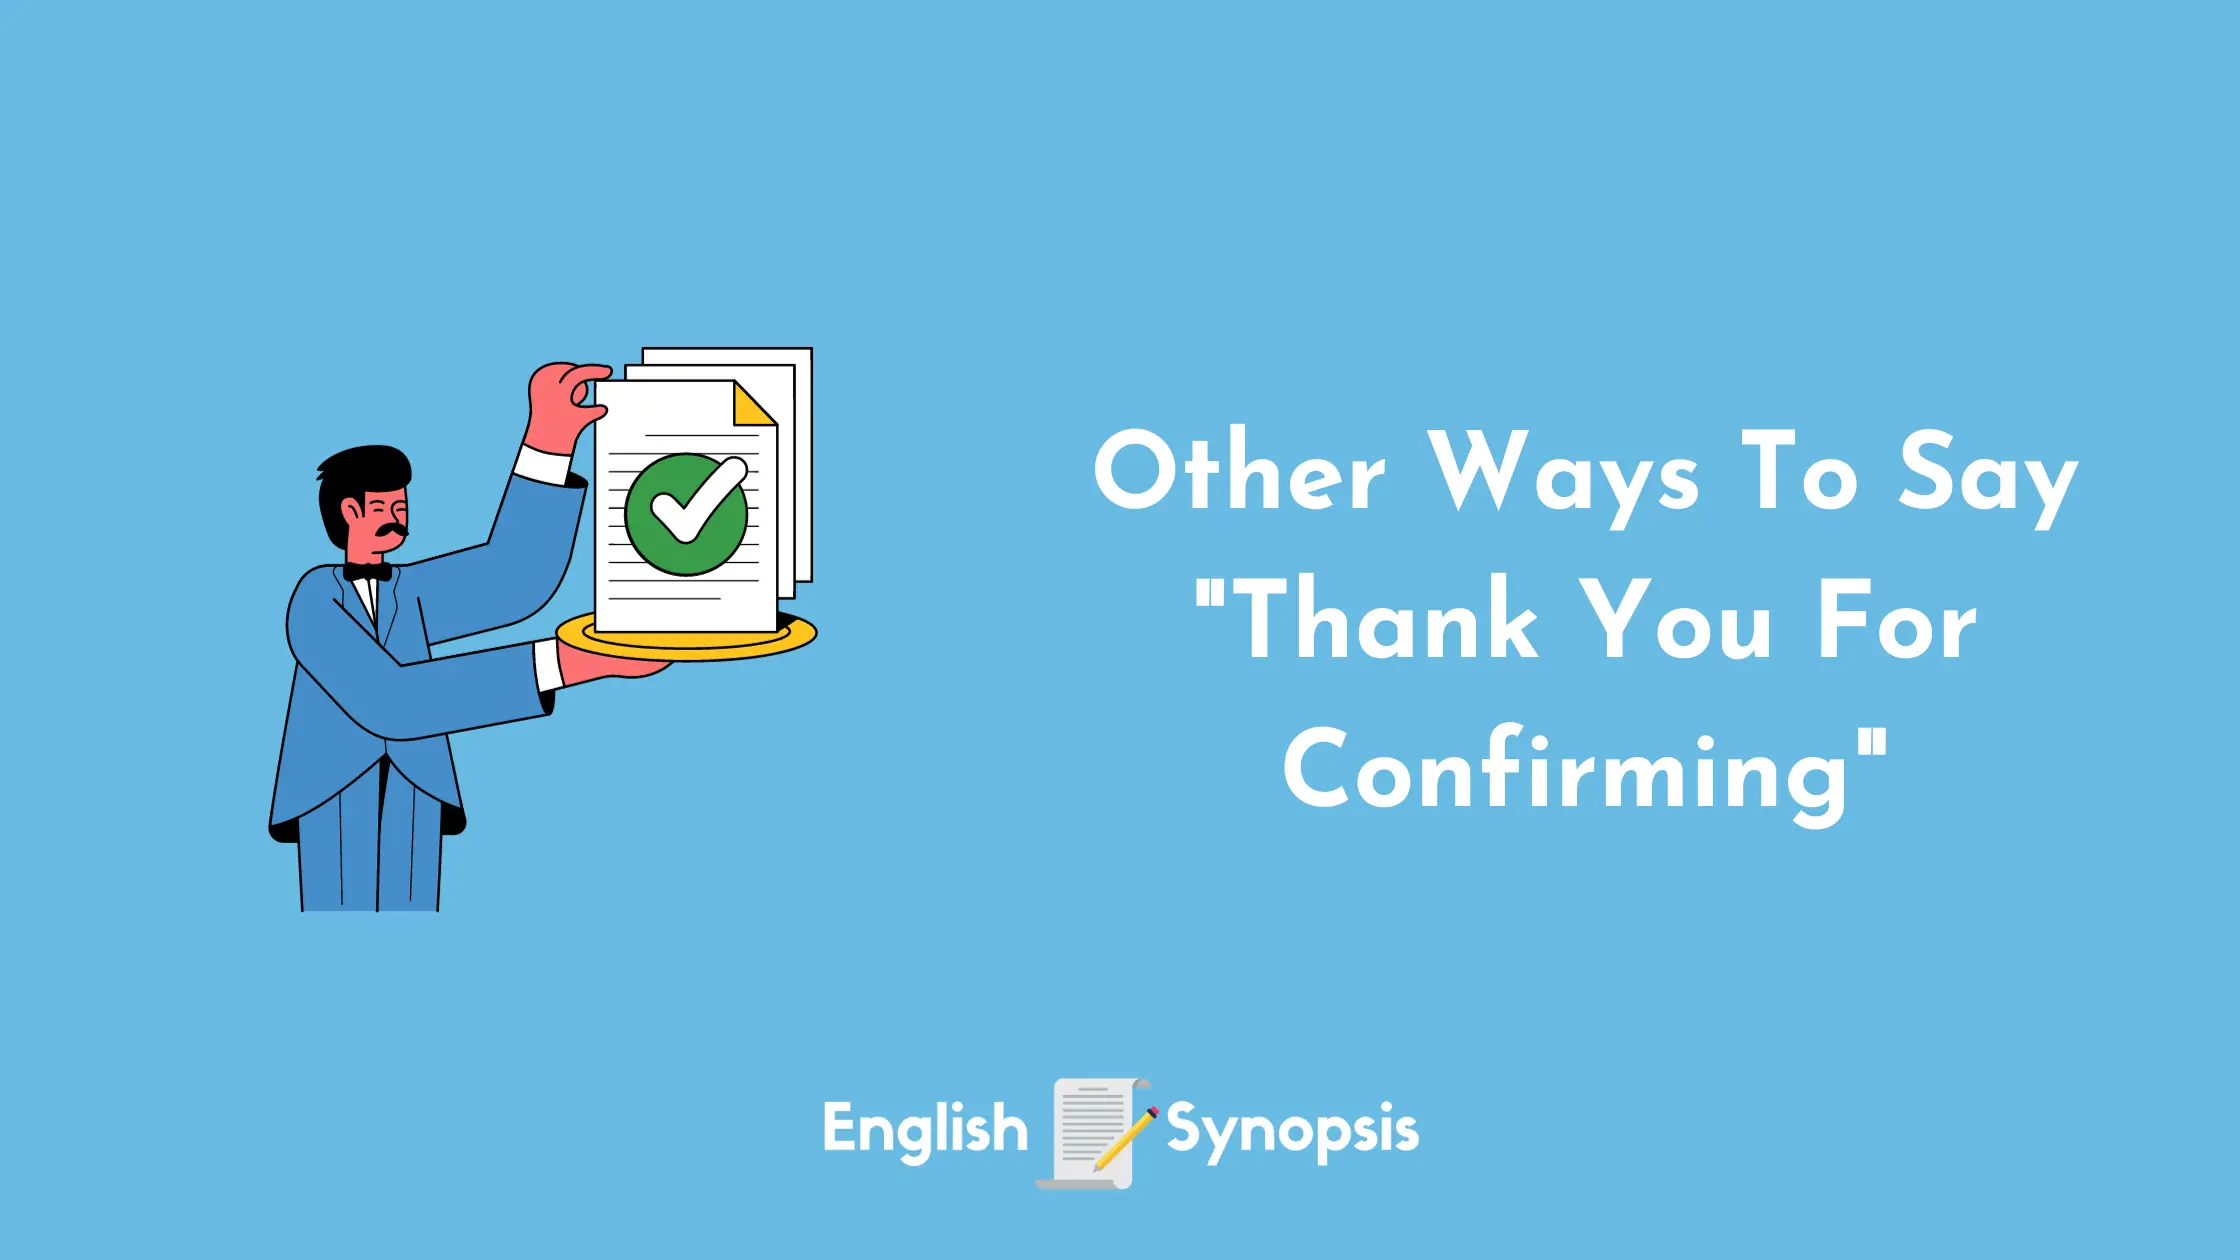 Other Ways To Say "Thank You For Confirming"